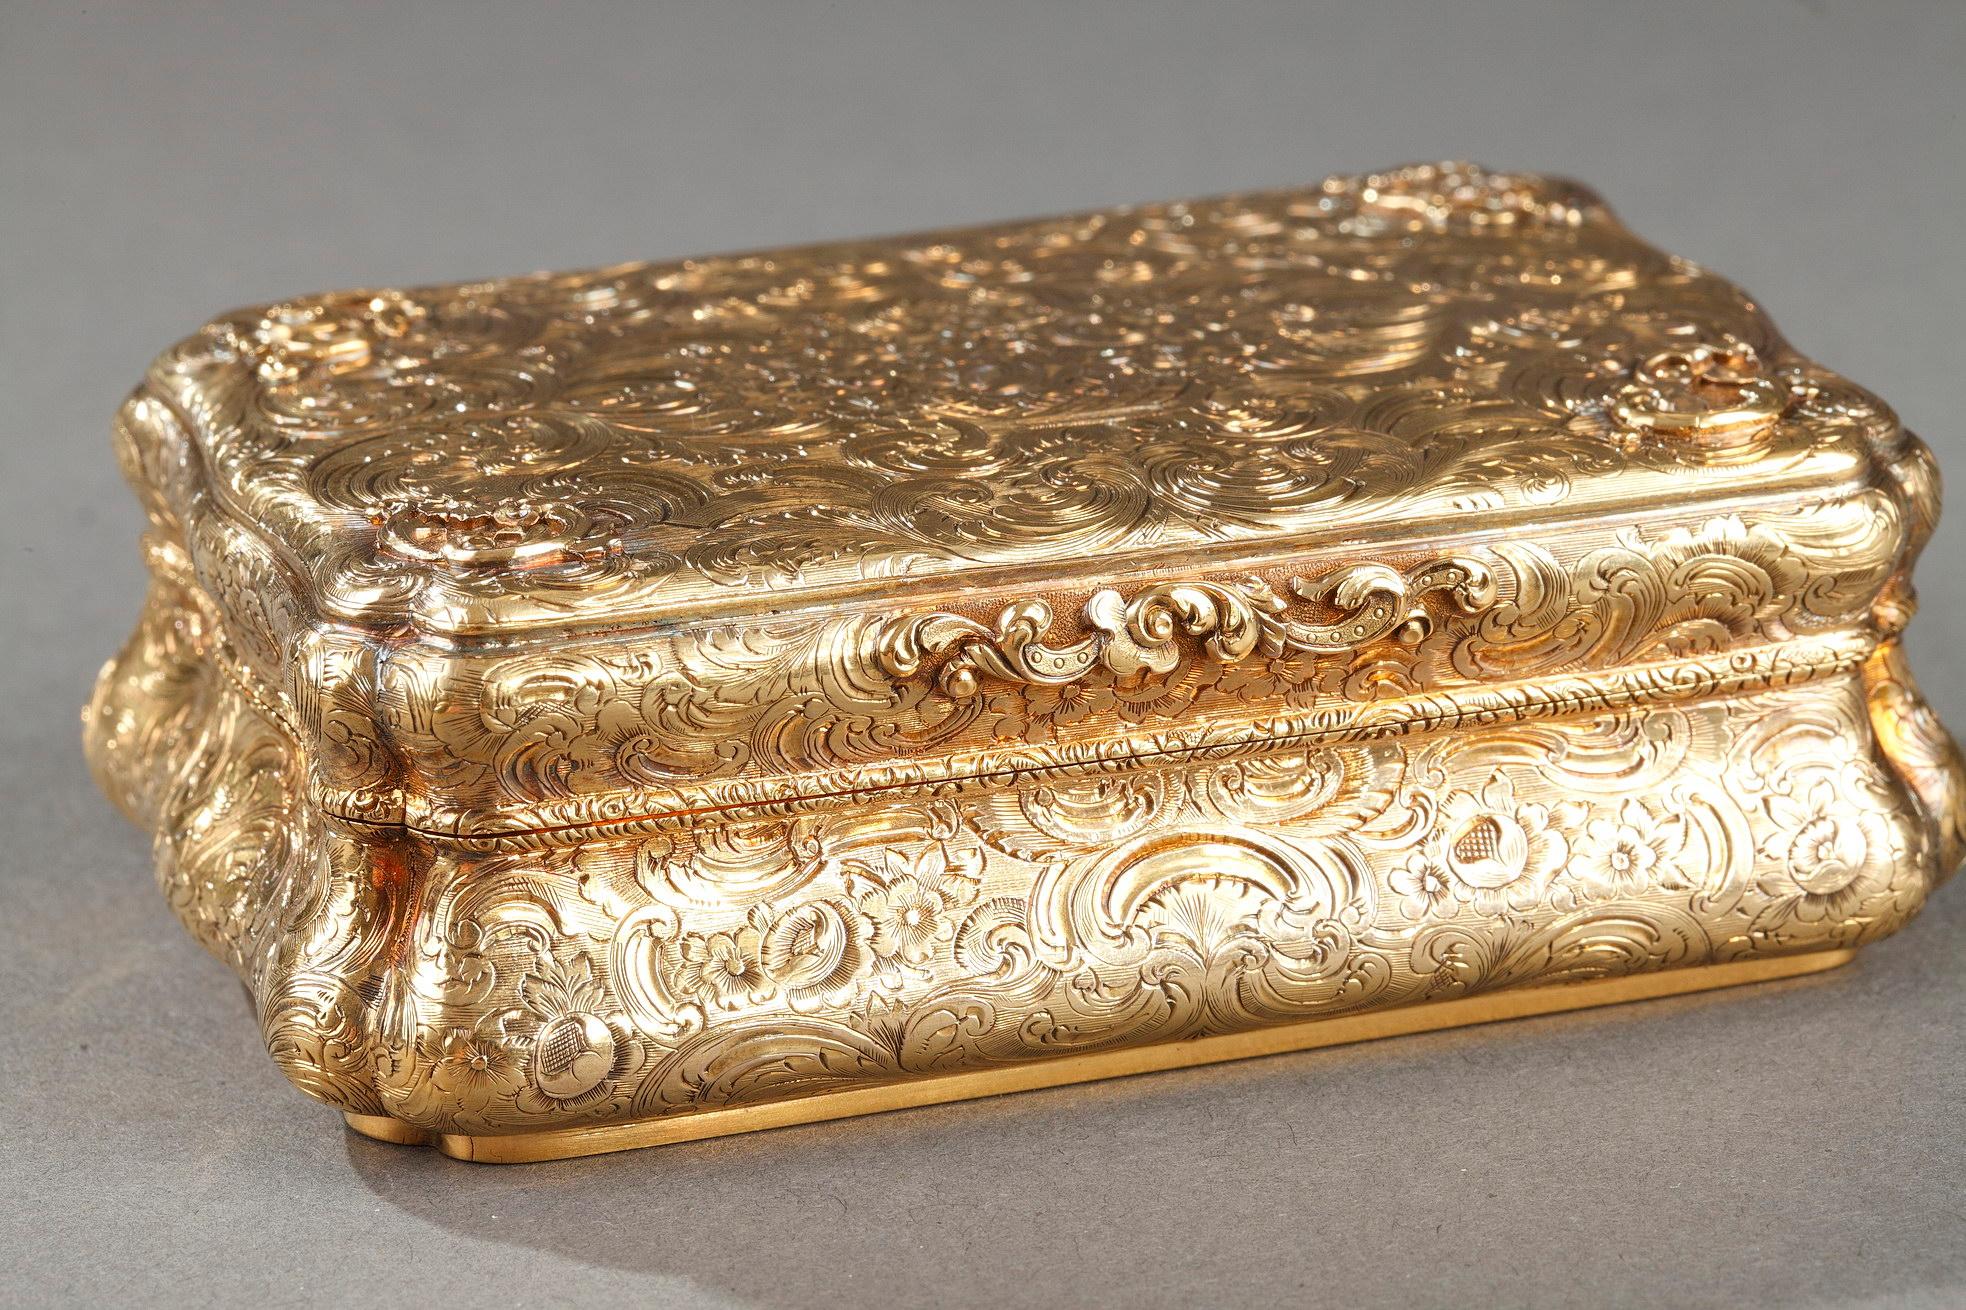 A cartouche-shaped gold box. The hinged lid, the base and the sides are chiseled with flowers and scrolls as well as rocaille patterns in slight relief. The lid has a chiseled bouquet of flower  in its center in a basket. On the back of the lid an